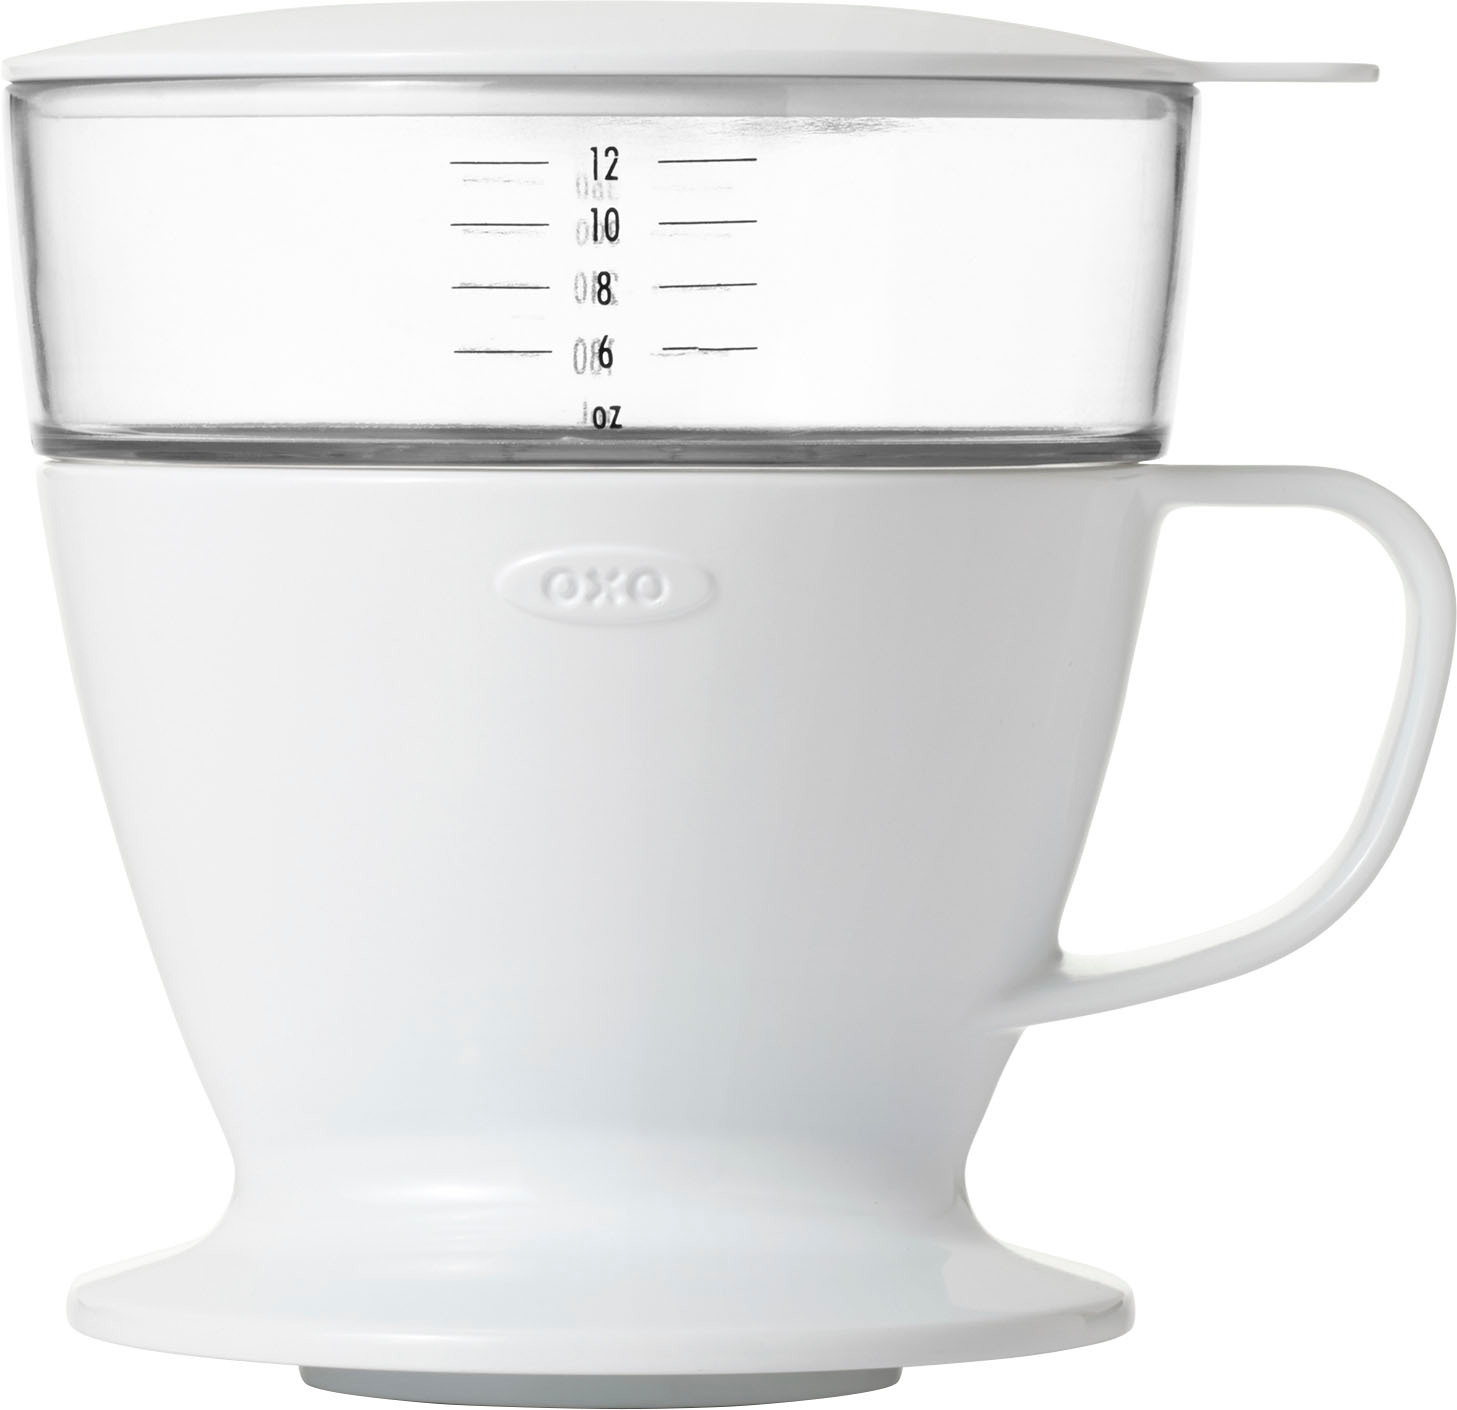 Angle View: OXO - Brew Pour Over Coffee Maker with Water Tank - White